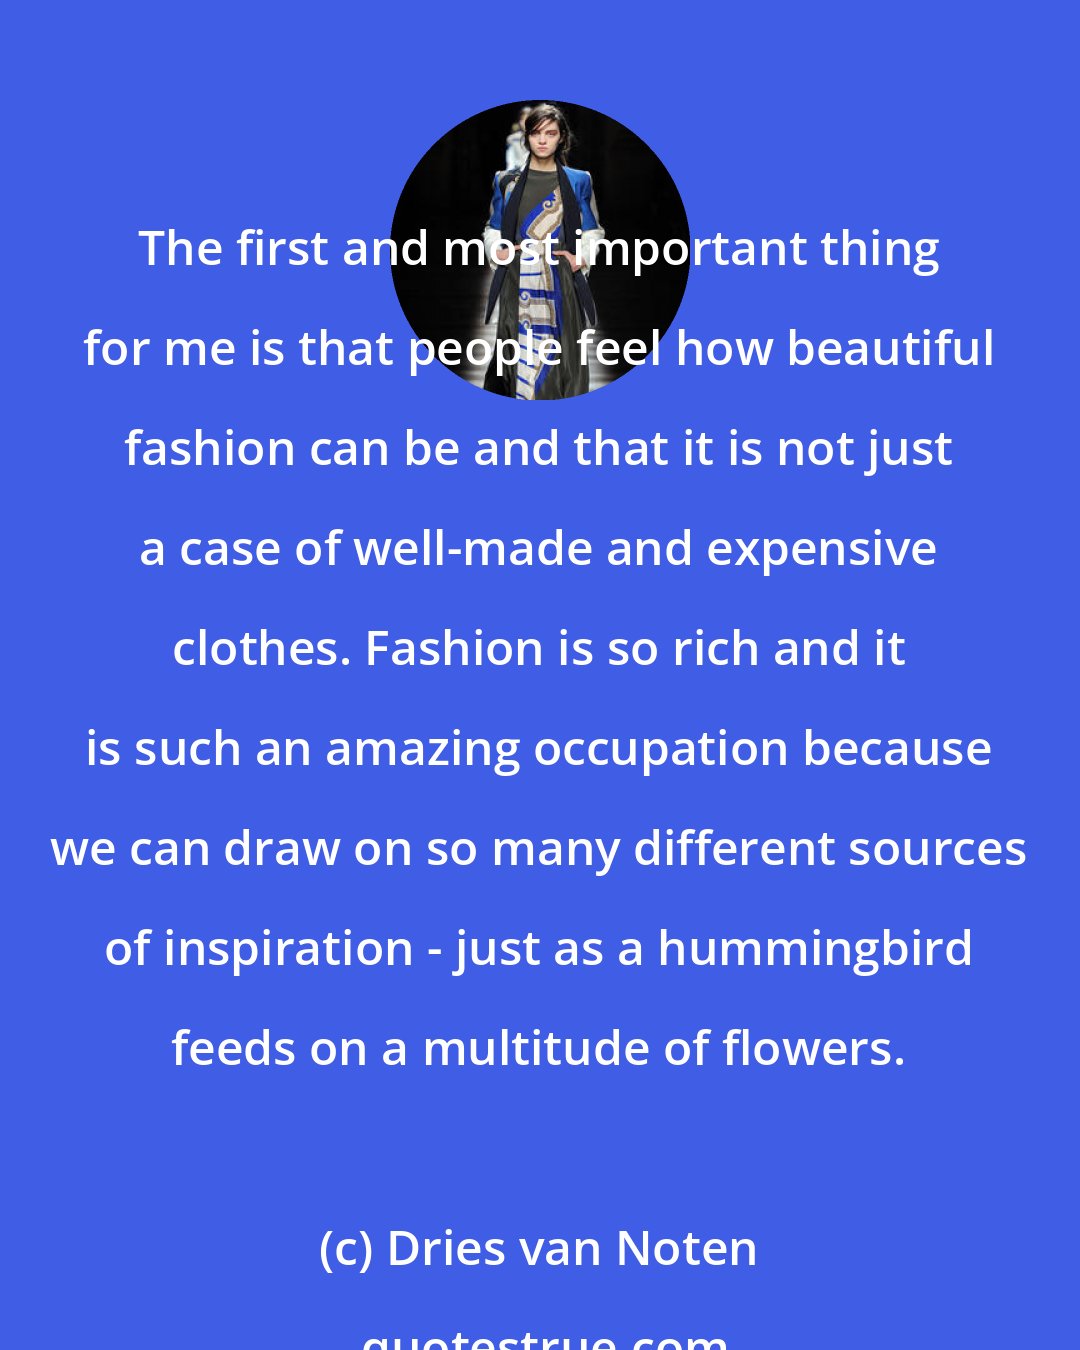 Dries van Noten: The first and most important thing for me is that people feel how beautiful fashion can be and that it is not just a case of well-made and expensive clothes. Fashion is so rich and it is such an amazing occupation because we can draw on so many different sources of inspiration - just as a hummingbird feeds on a multitude of flowers.